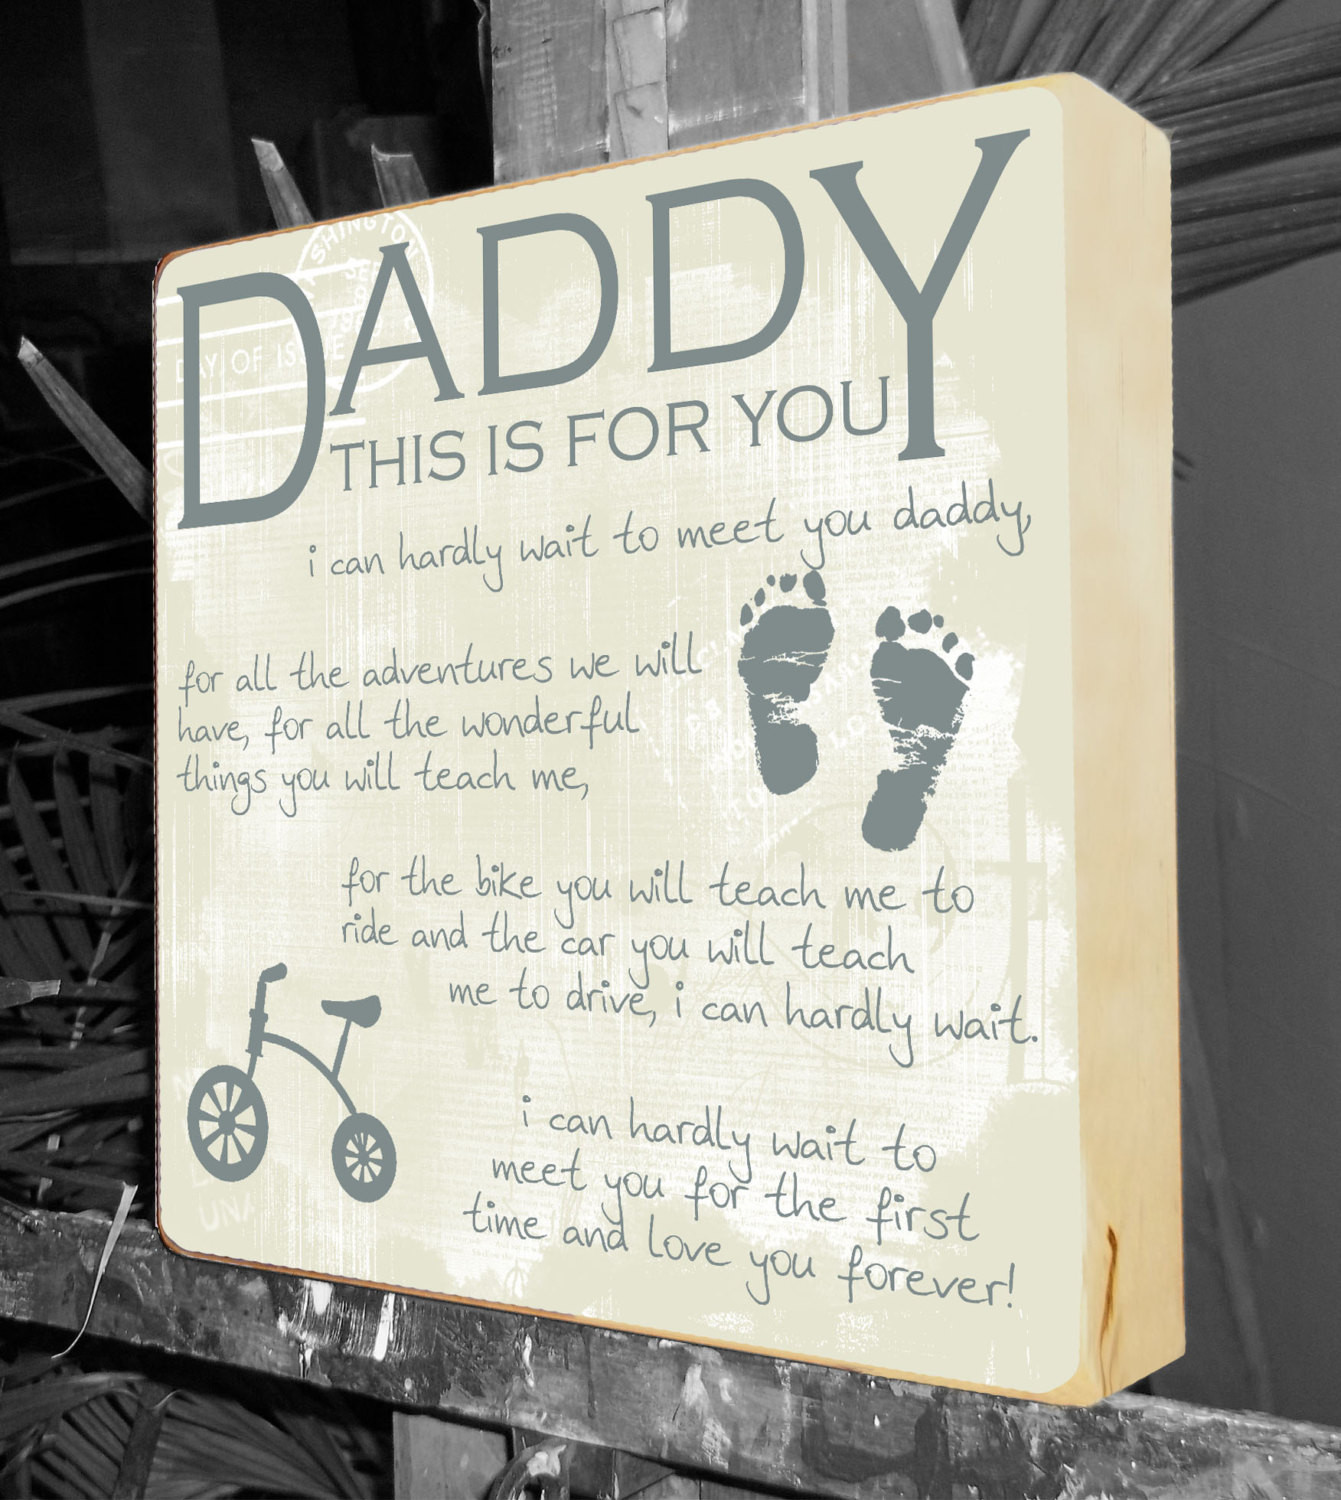 Daddy Baby Shower Gift Ideas
 New Dad Gifts Gifts for New Parents Baby Shower Gift